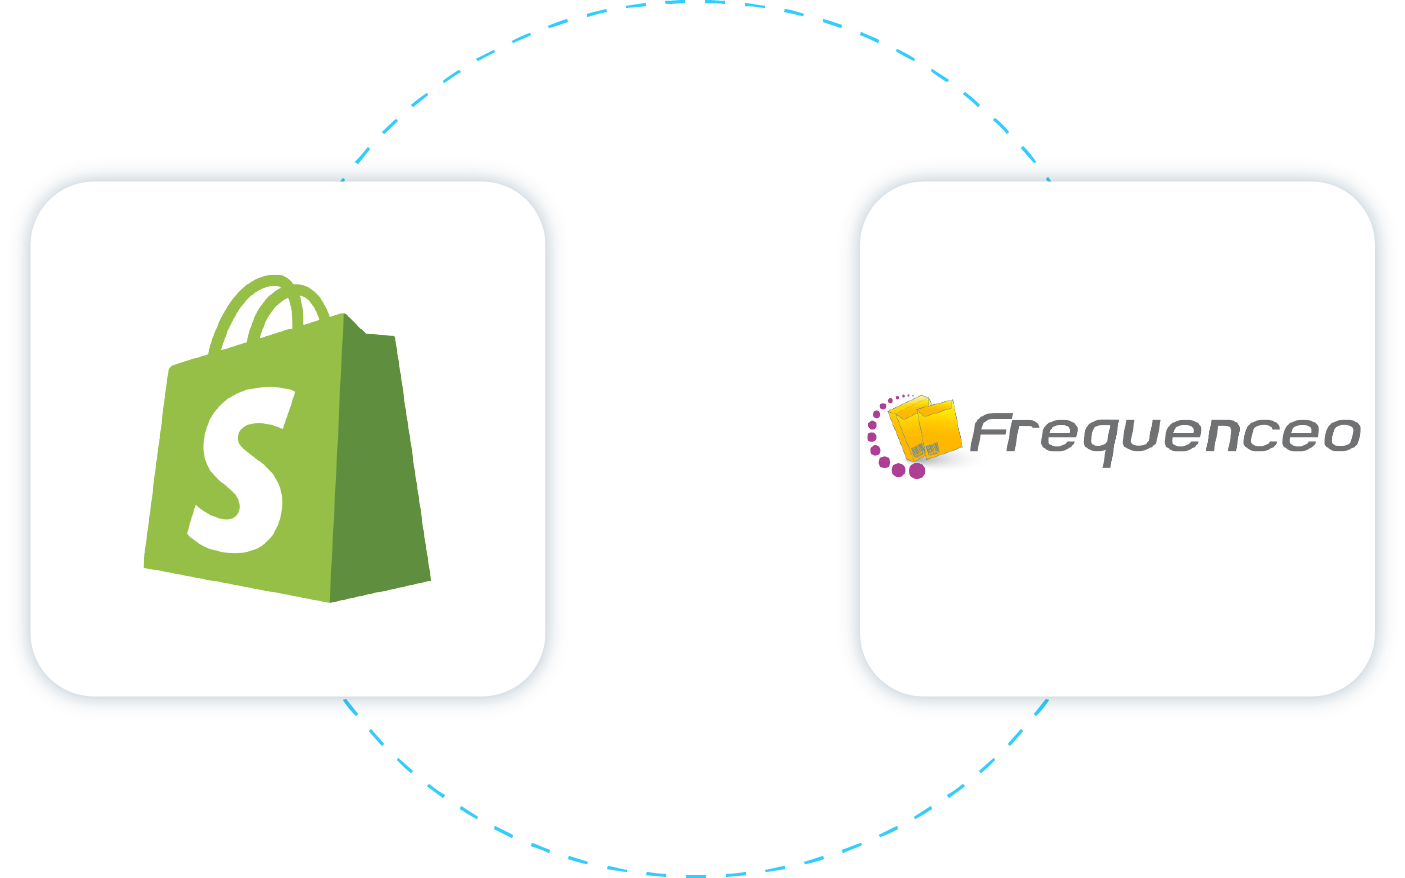 module frequenceo shopify